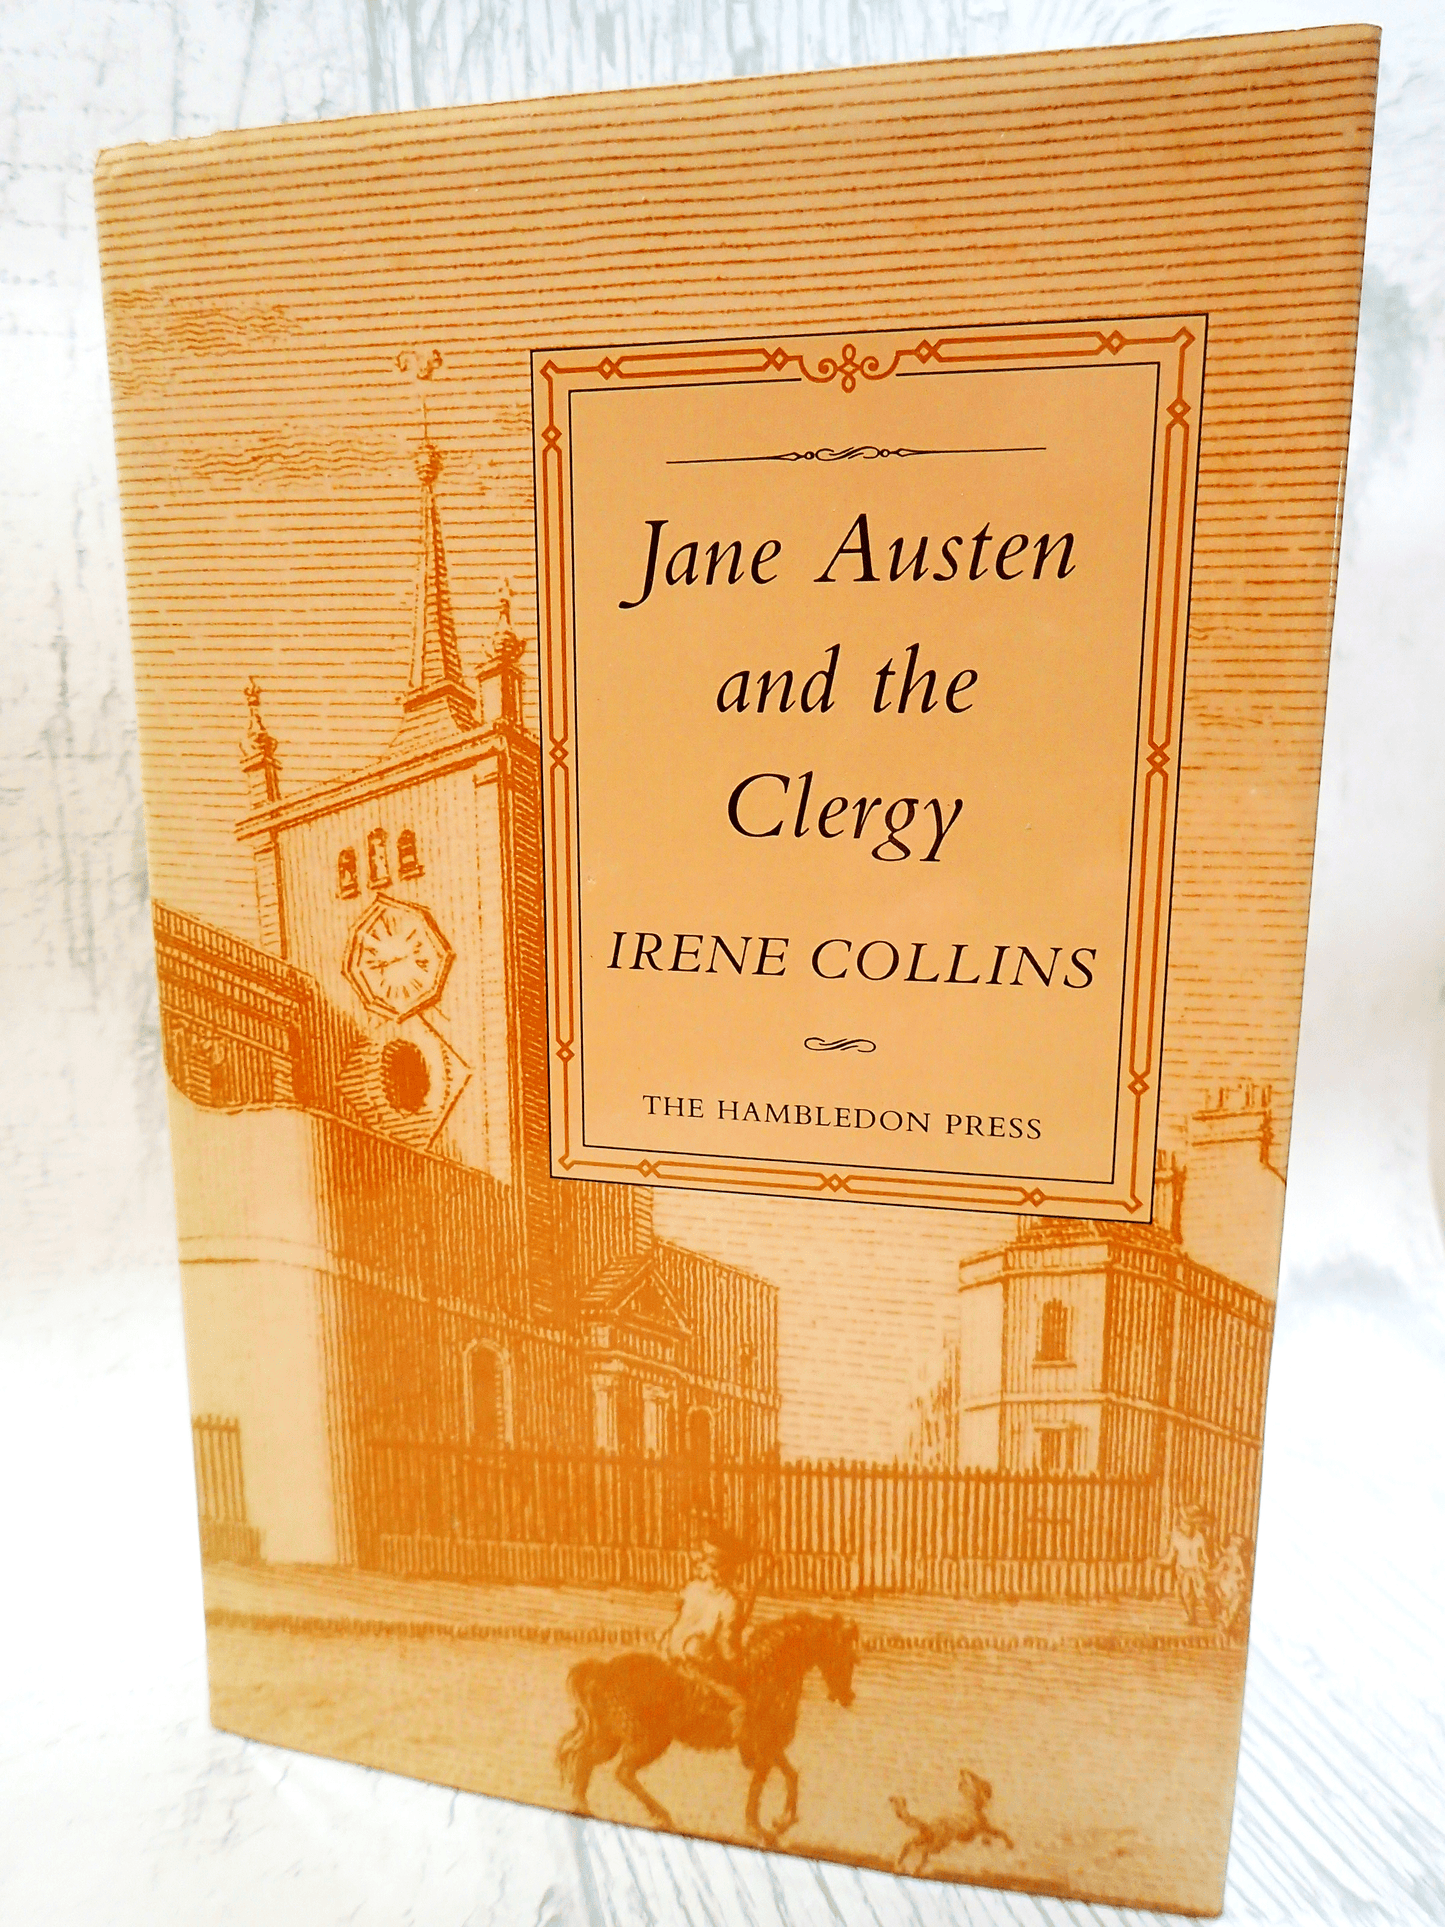 Front cover of vintage book Jane Austen and the Clergy by Irene Collins showing a sepia engraving of a Regency street against a light background. 